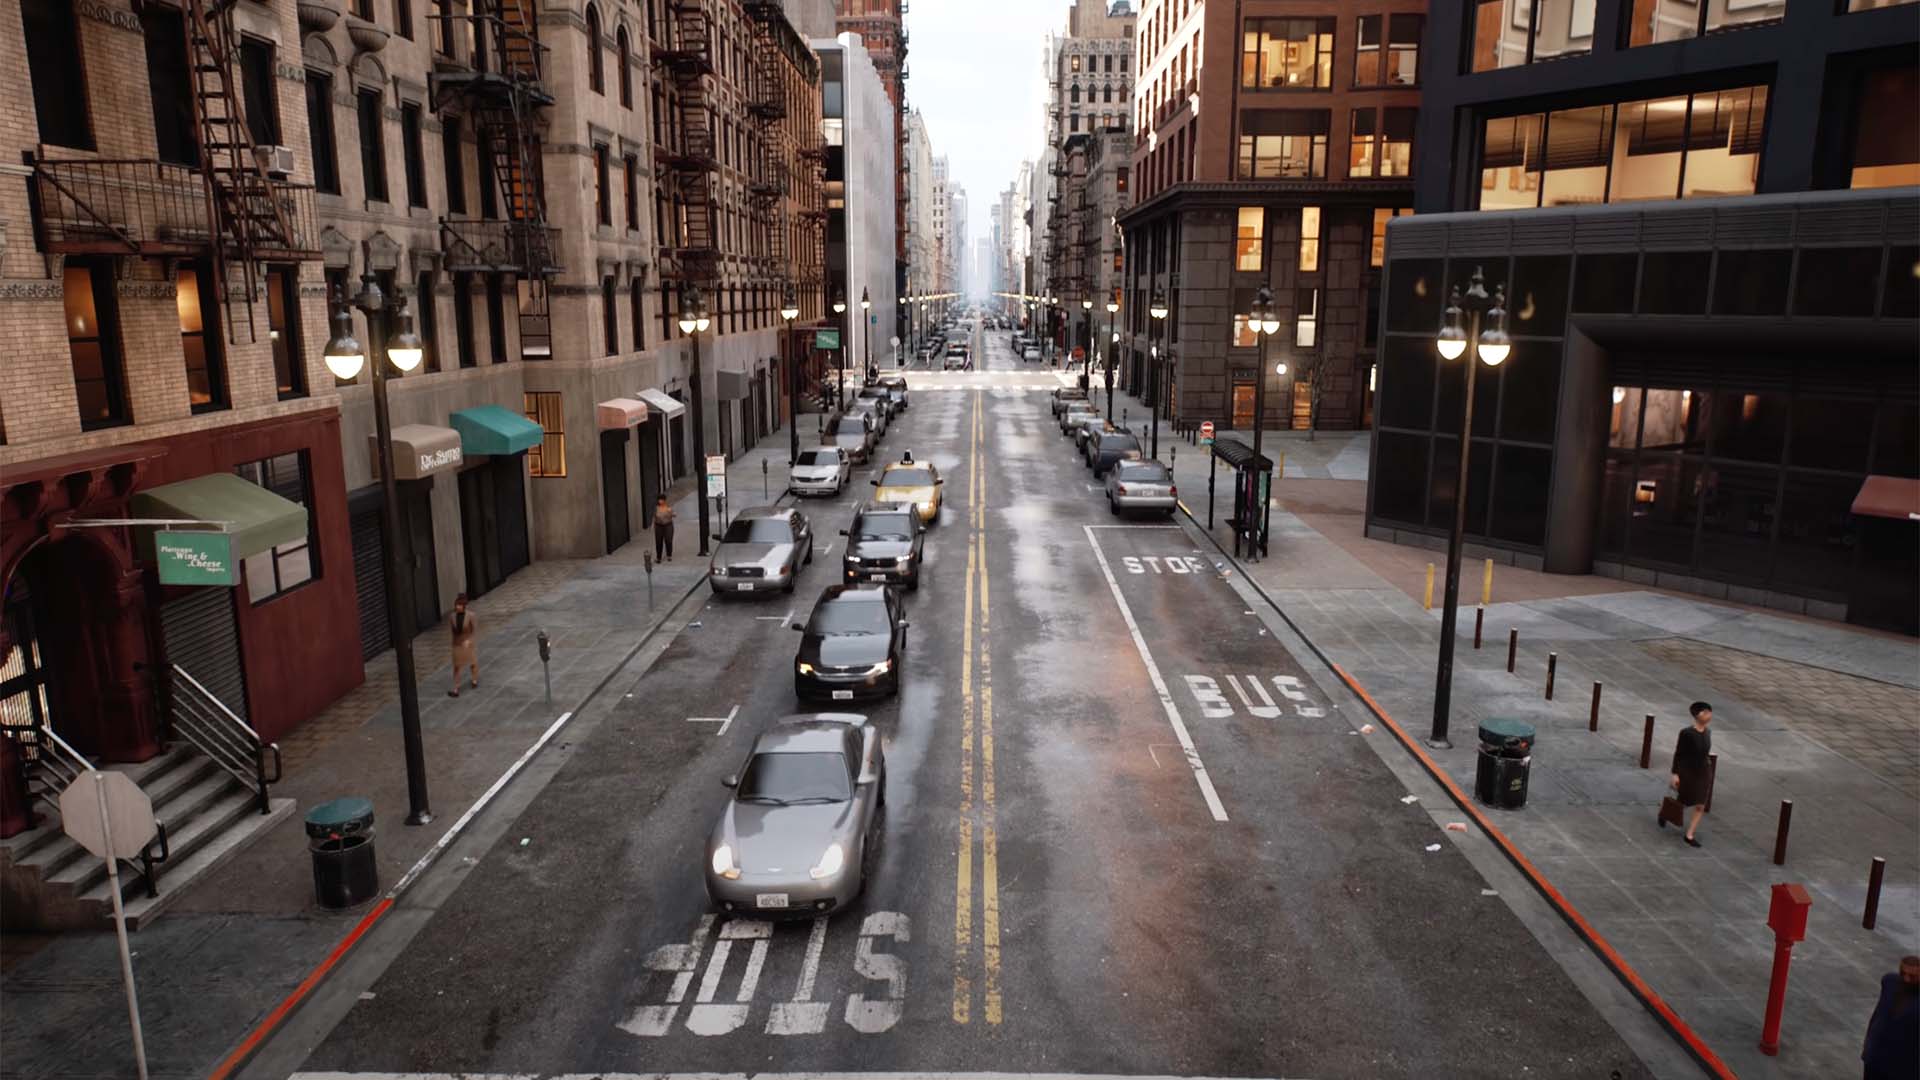 This is not a real city. It's entirely computer generated, in realtime, in Unreal Engine 5.